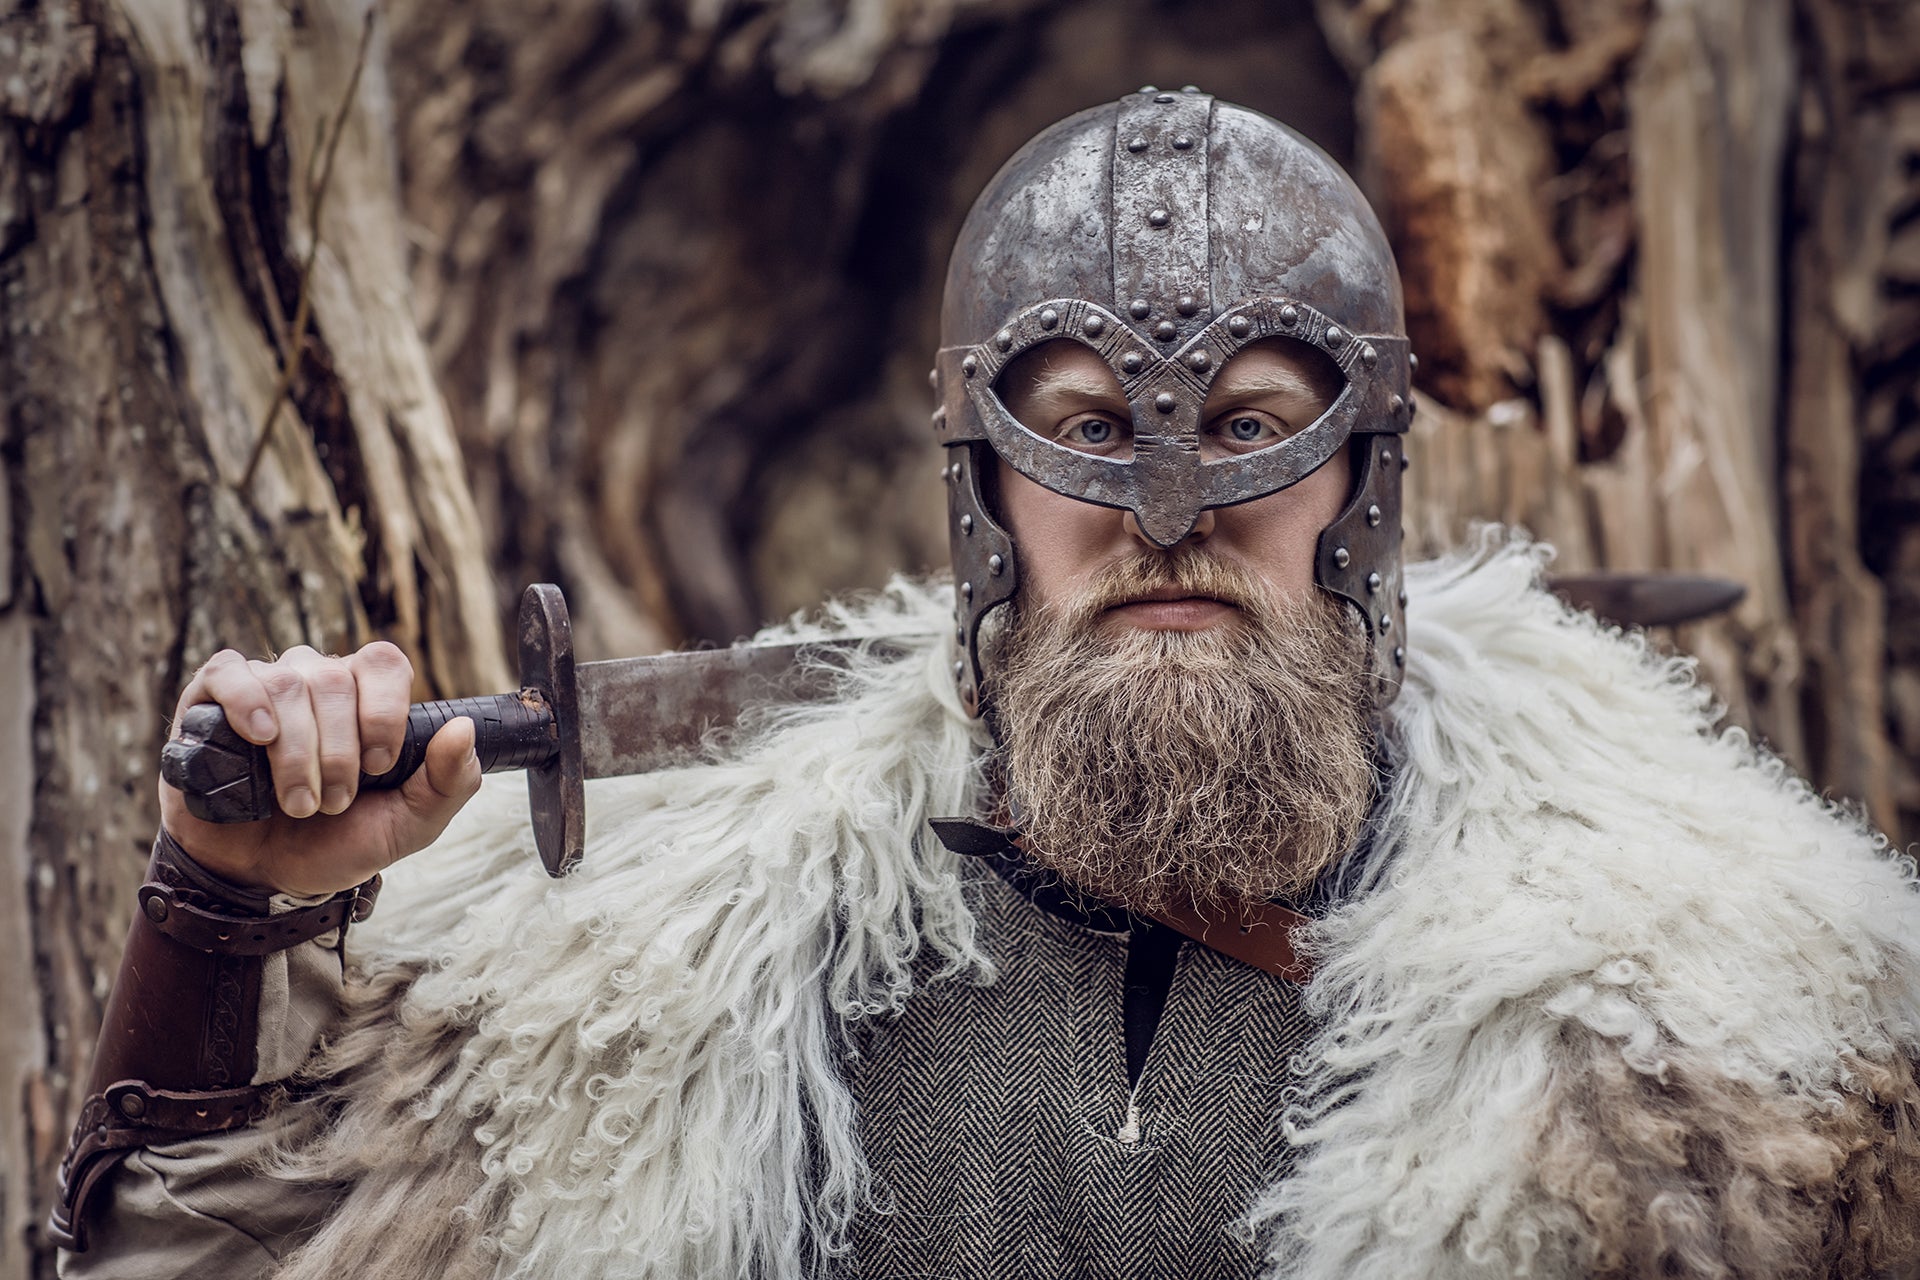 The vikings, who came from Scandinavia, used iron as their main ingredient for forging weaponry, but it was also common practice to add the bones of dead animals to the mix. The belief was that it would infuse the weapon with the spirit of the creature, making it stronger, but they ended up making a primitive version of steel because of the carbon in the bones mixing with the iron making the weapon stronger, just as they thought it would. u/Nameless_Chad